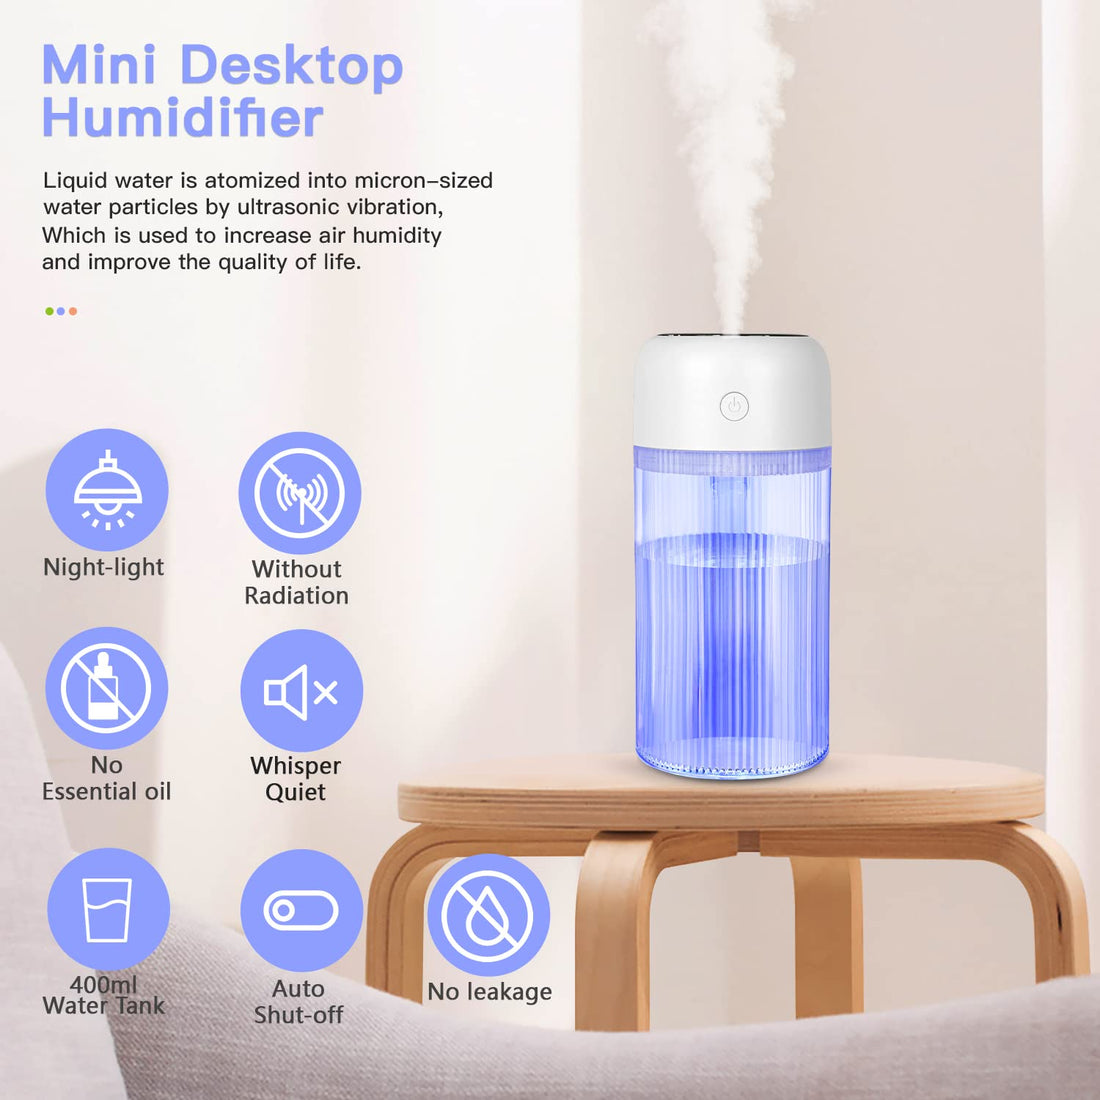 Portable Small Humidifier, 400ml Mini Baby Humidifier, Desktop Portable Air Humidifier for Bedroom Plants Travel Car Office, Super Quiet, Auto Shut-Off, 7 Color LED Night Lights, 2 Mist Modes